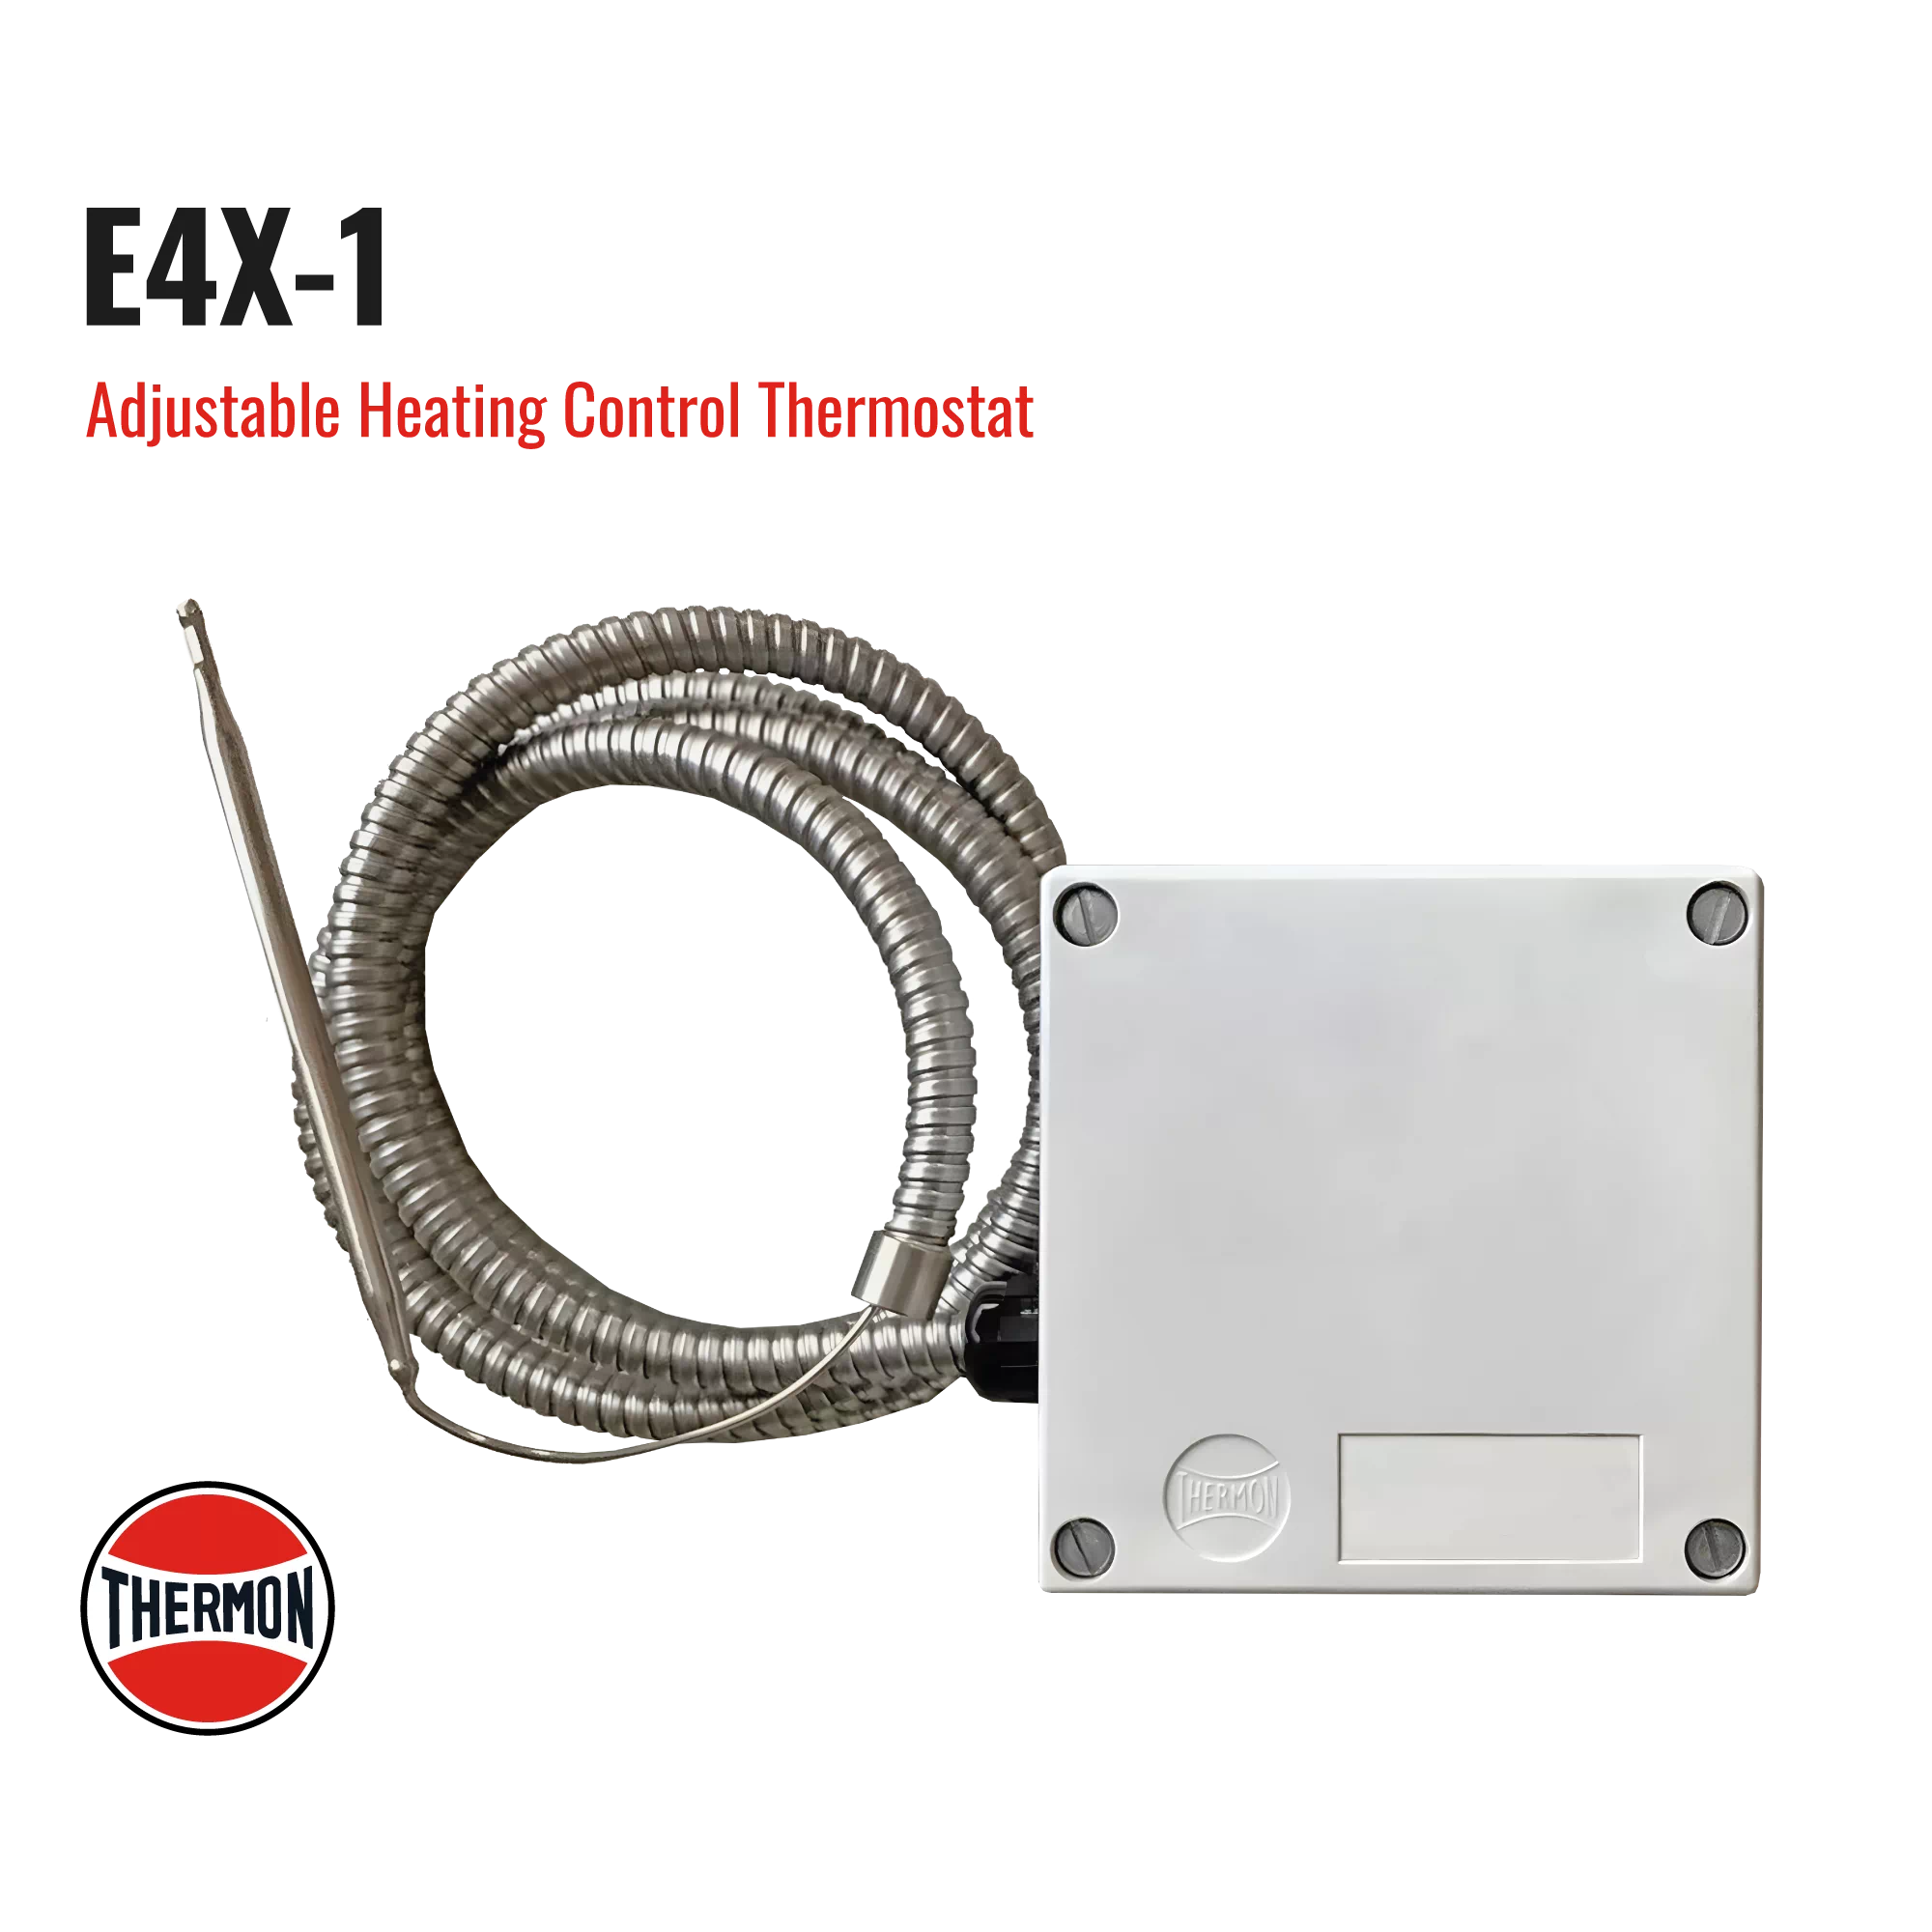 Thermon-E4X-1-Industrial-Heating-Heat-Tracing-Systems